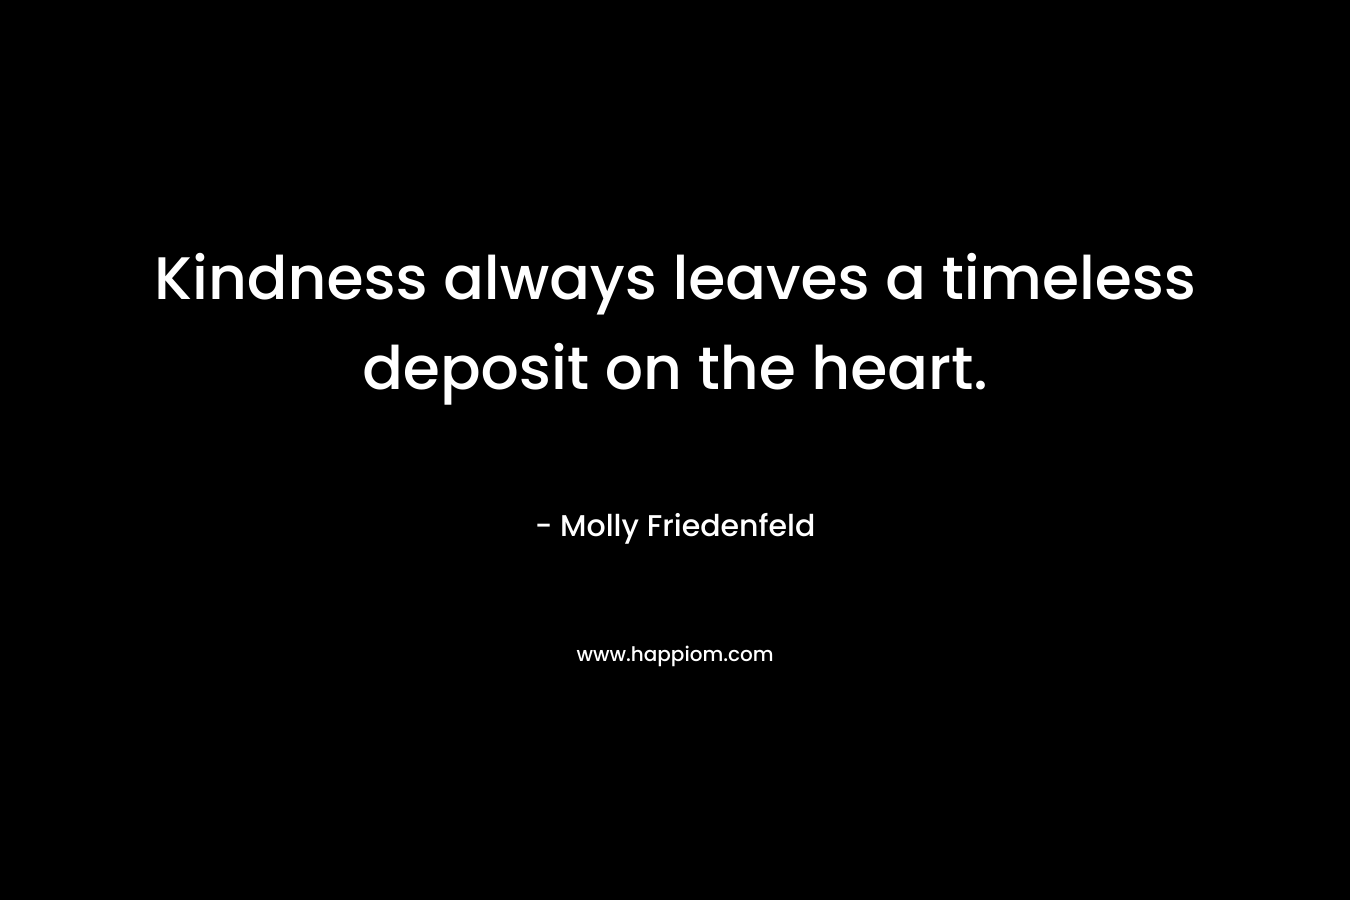 Kindness always leaves a timeless deposit on the heart.